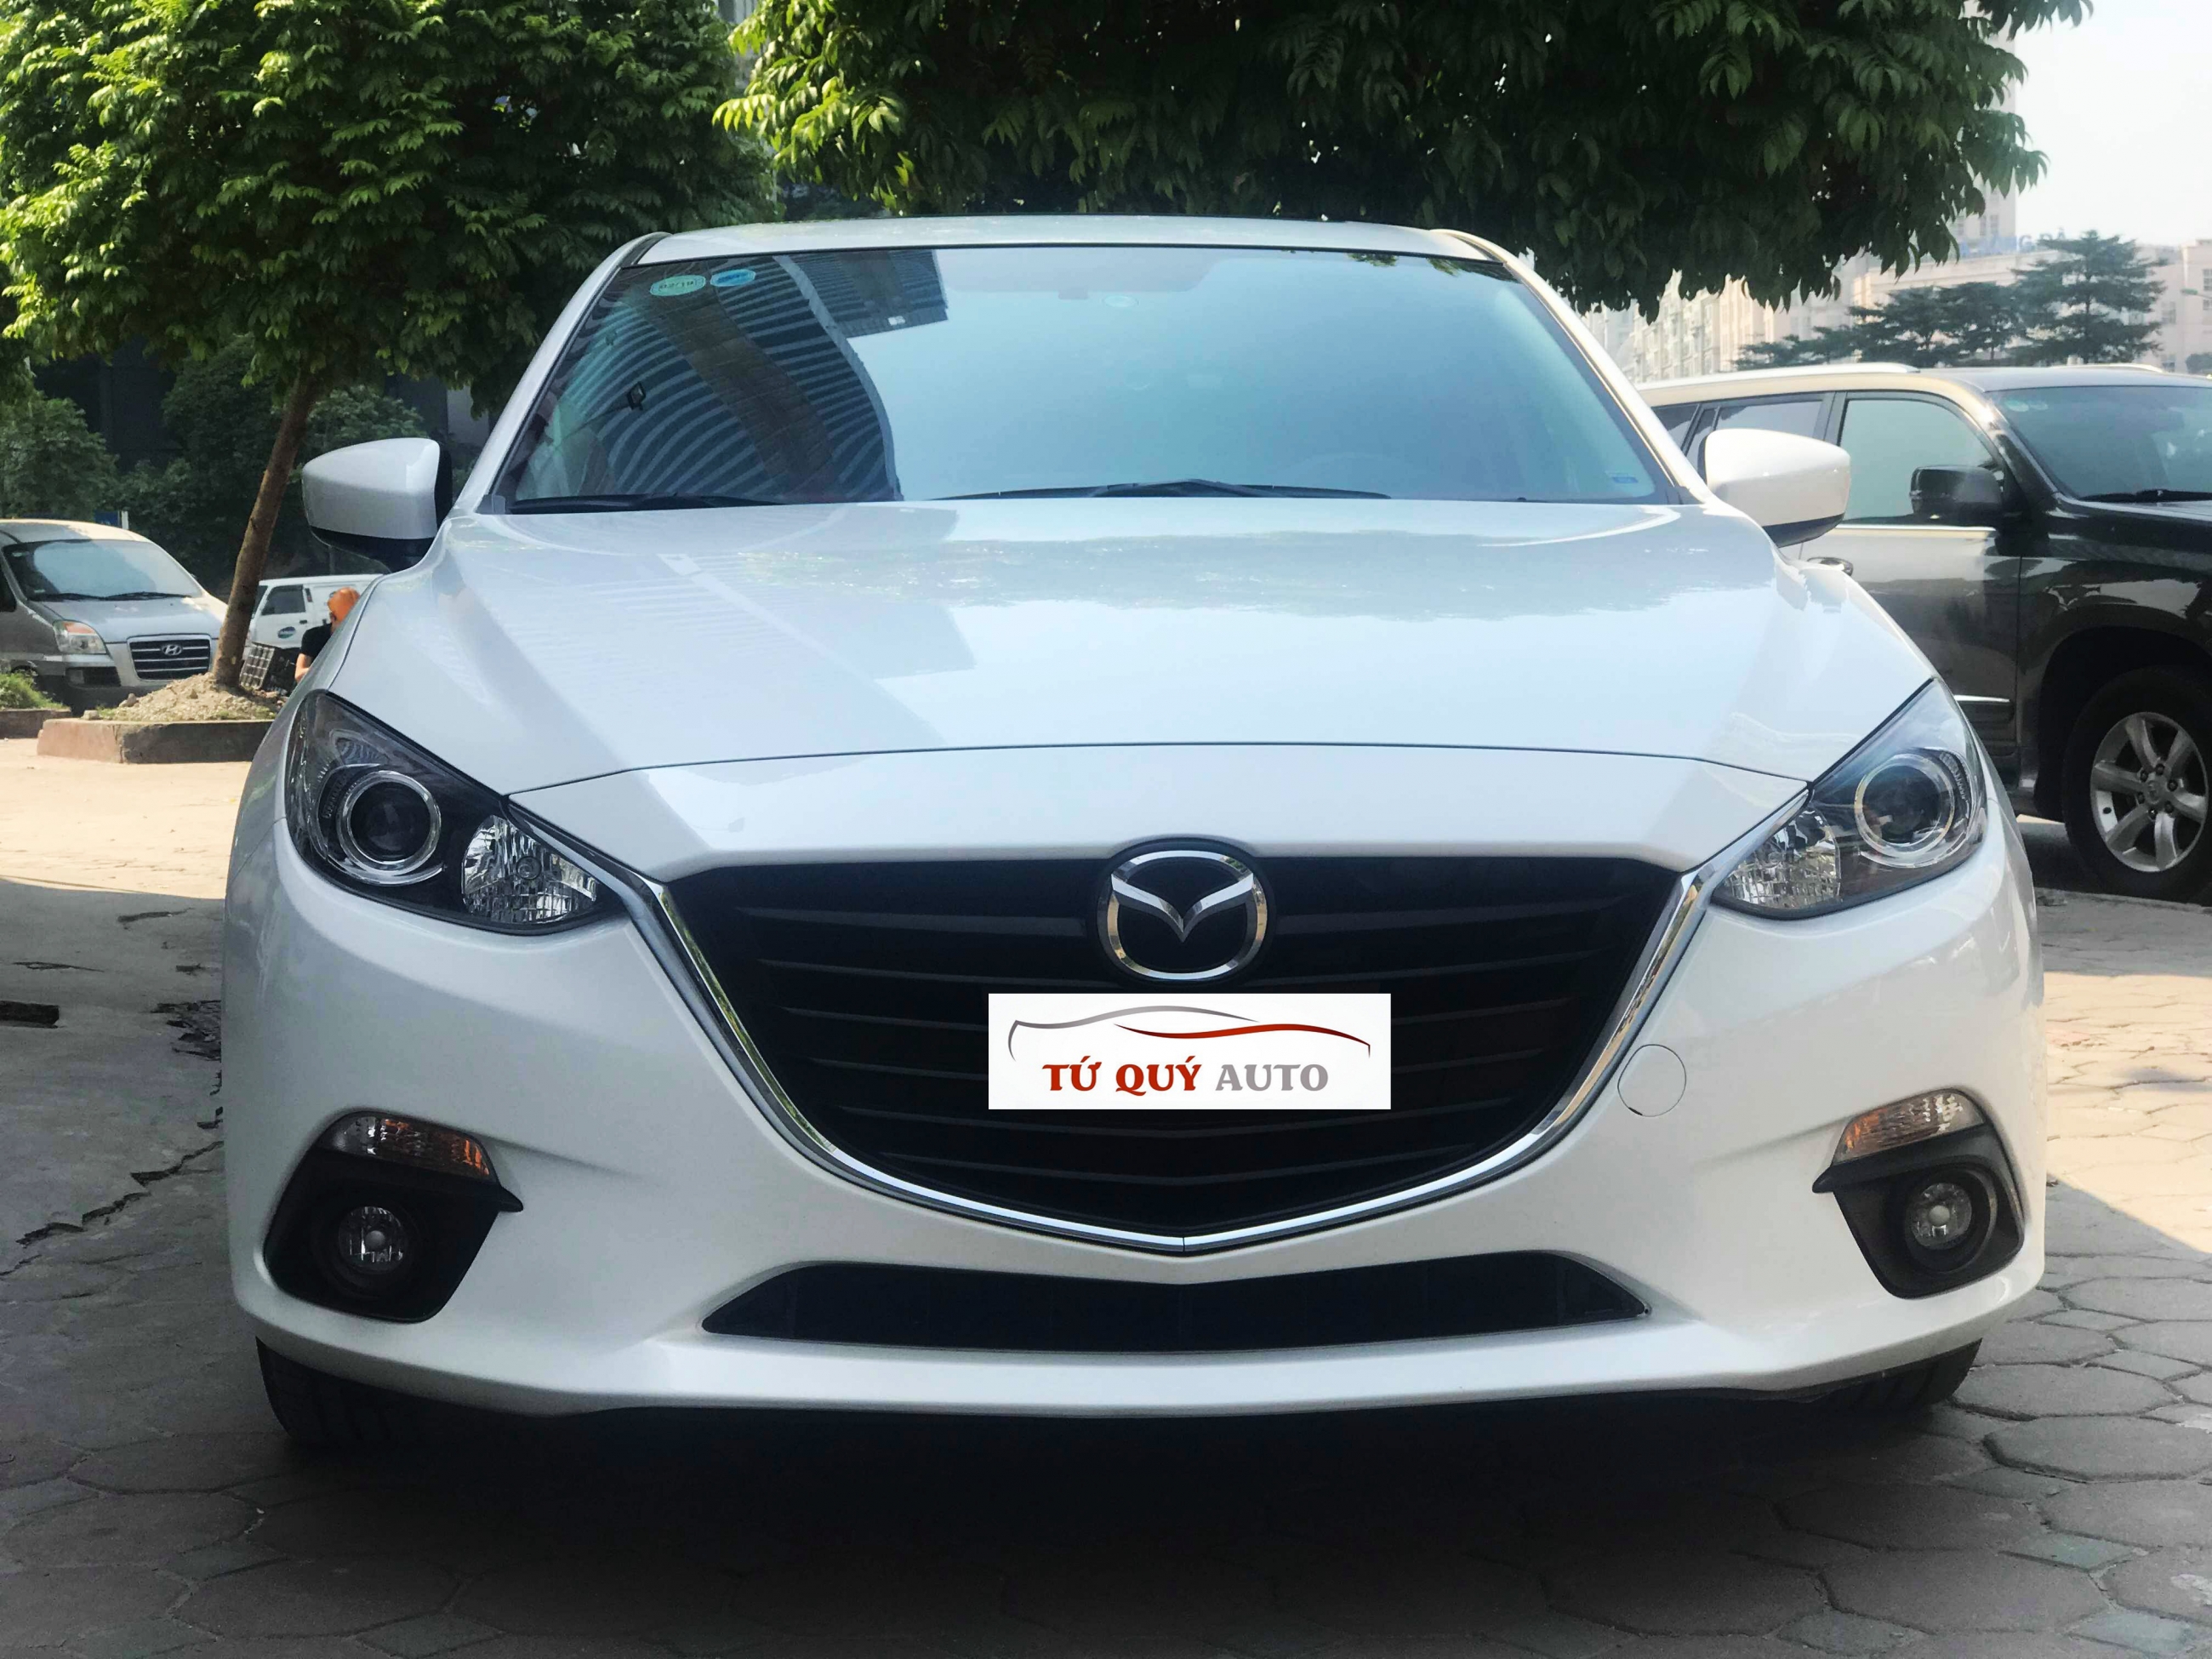 Mazda 3 2016 Hatchback 2016  2019 reviews technical data prices